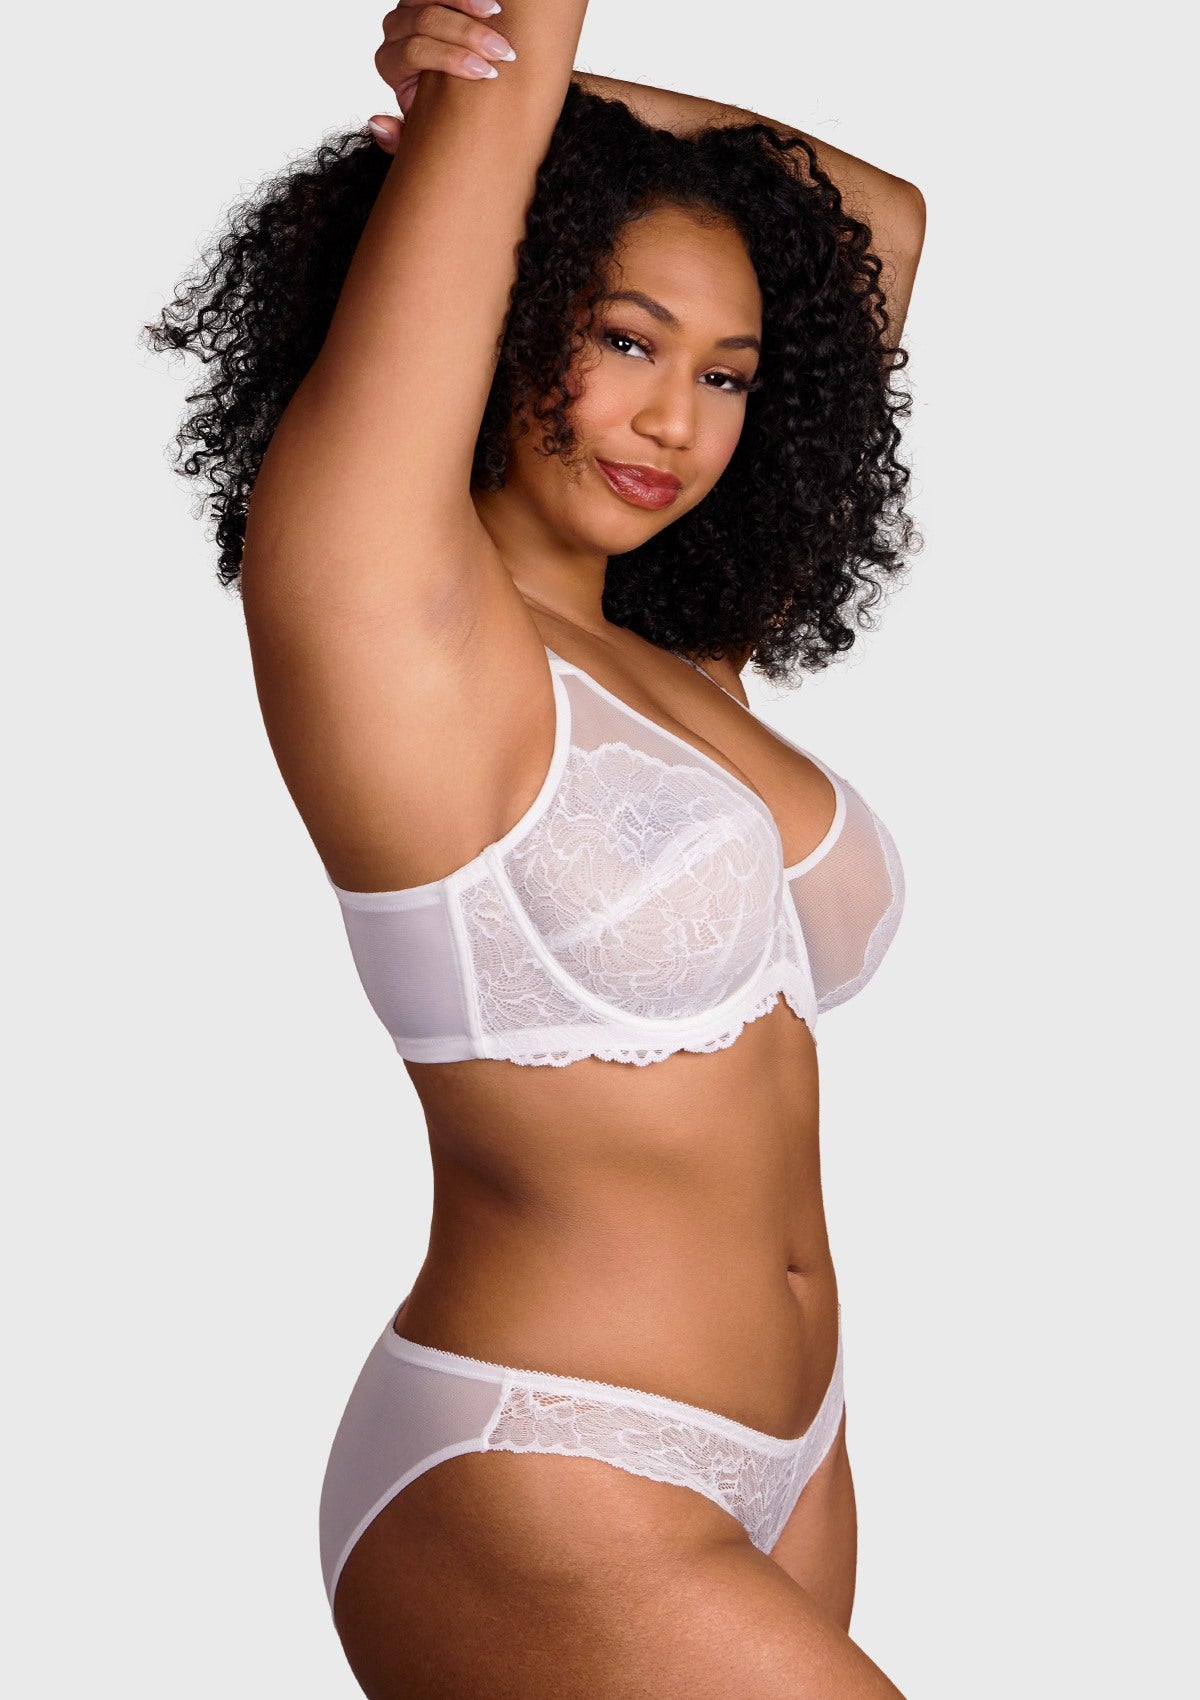 HSIA Blossom Bestseller Unlined Underwire Lace Bra - Light Gray / 38 / DDD/F